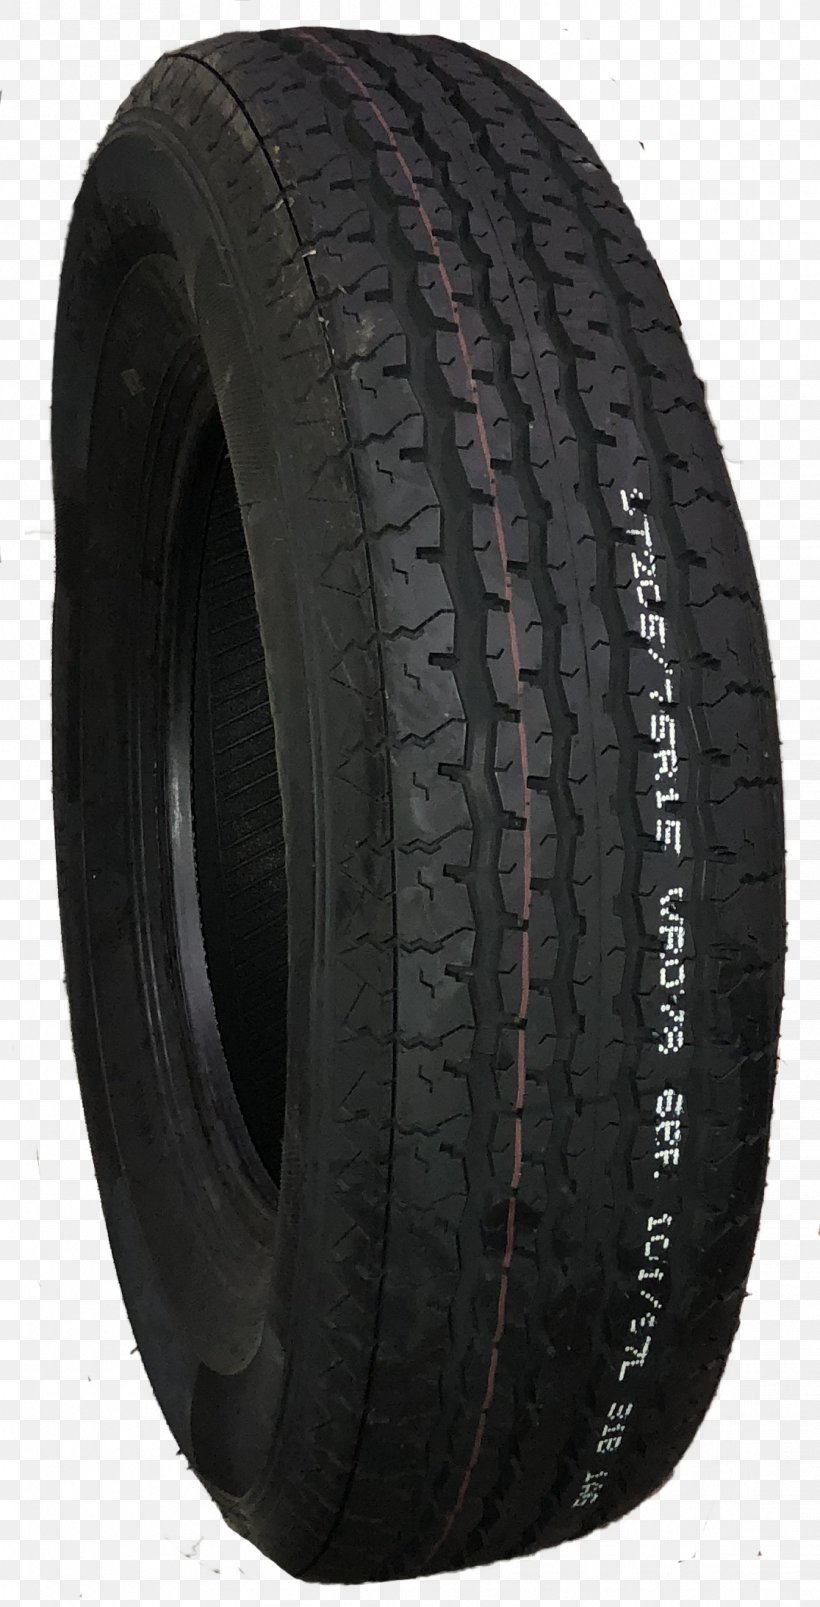 Tread Synthetic Rubber Natural Rubber Alloy Wheel Tire, PNG, 1116x2188px, Tread, Alloy, Alloy Wheel, Auto Part, Automotive Tire Download Free